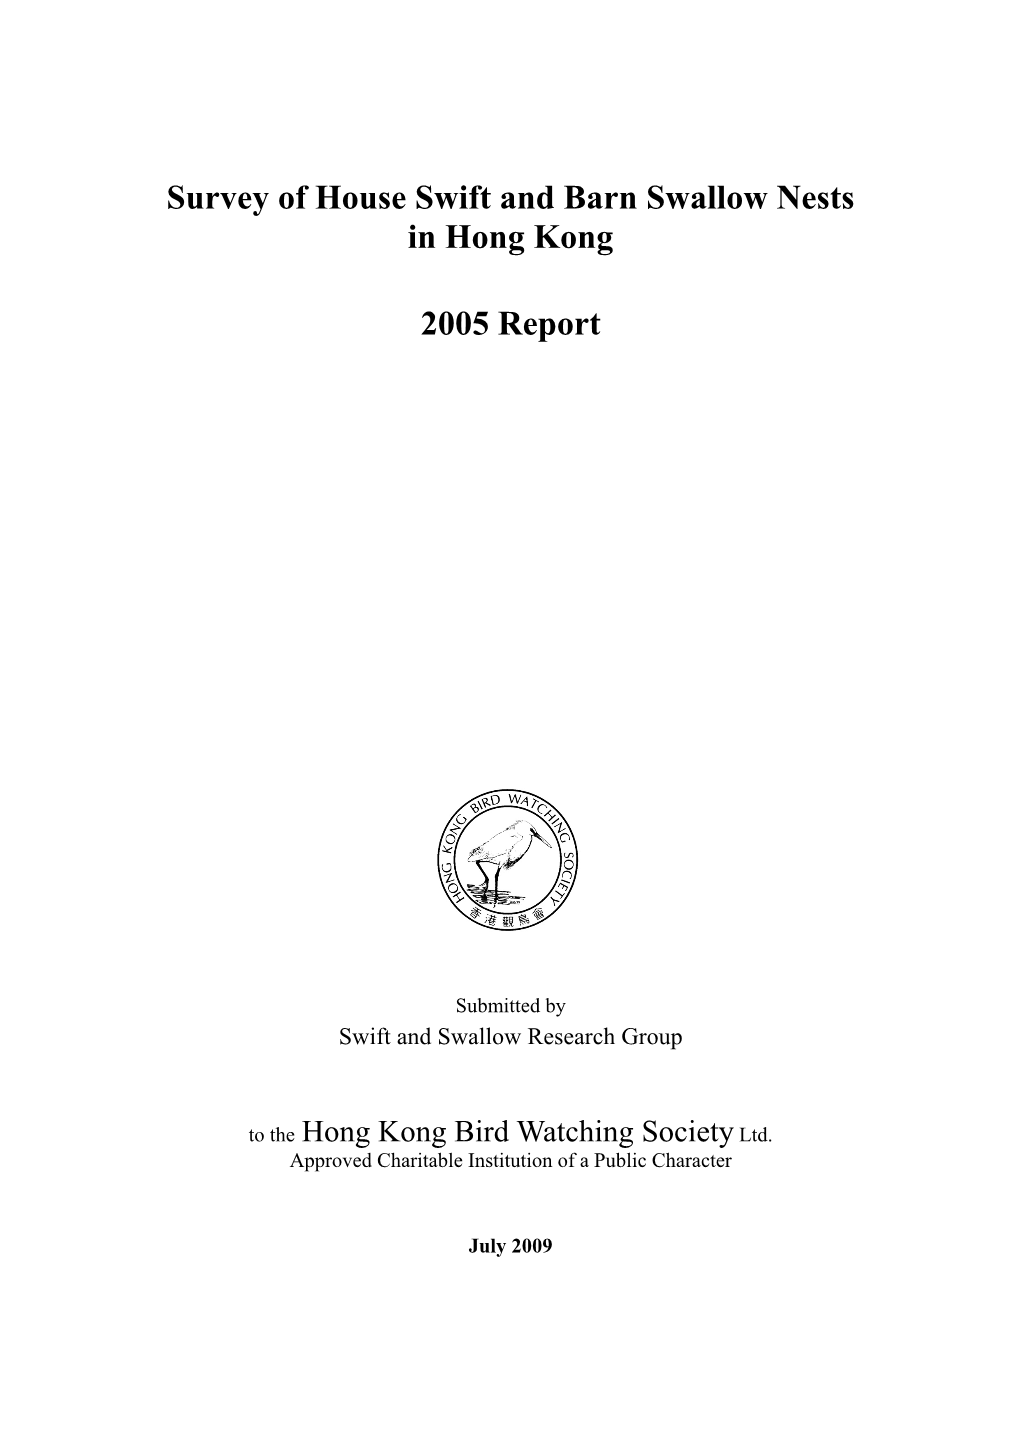 Survey of House Swift and Barn Swallow Nests in Hong Kong 2005